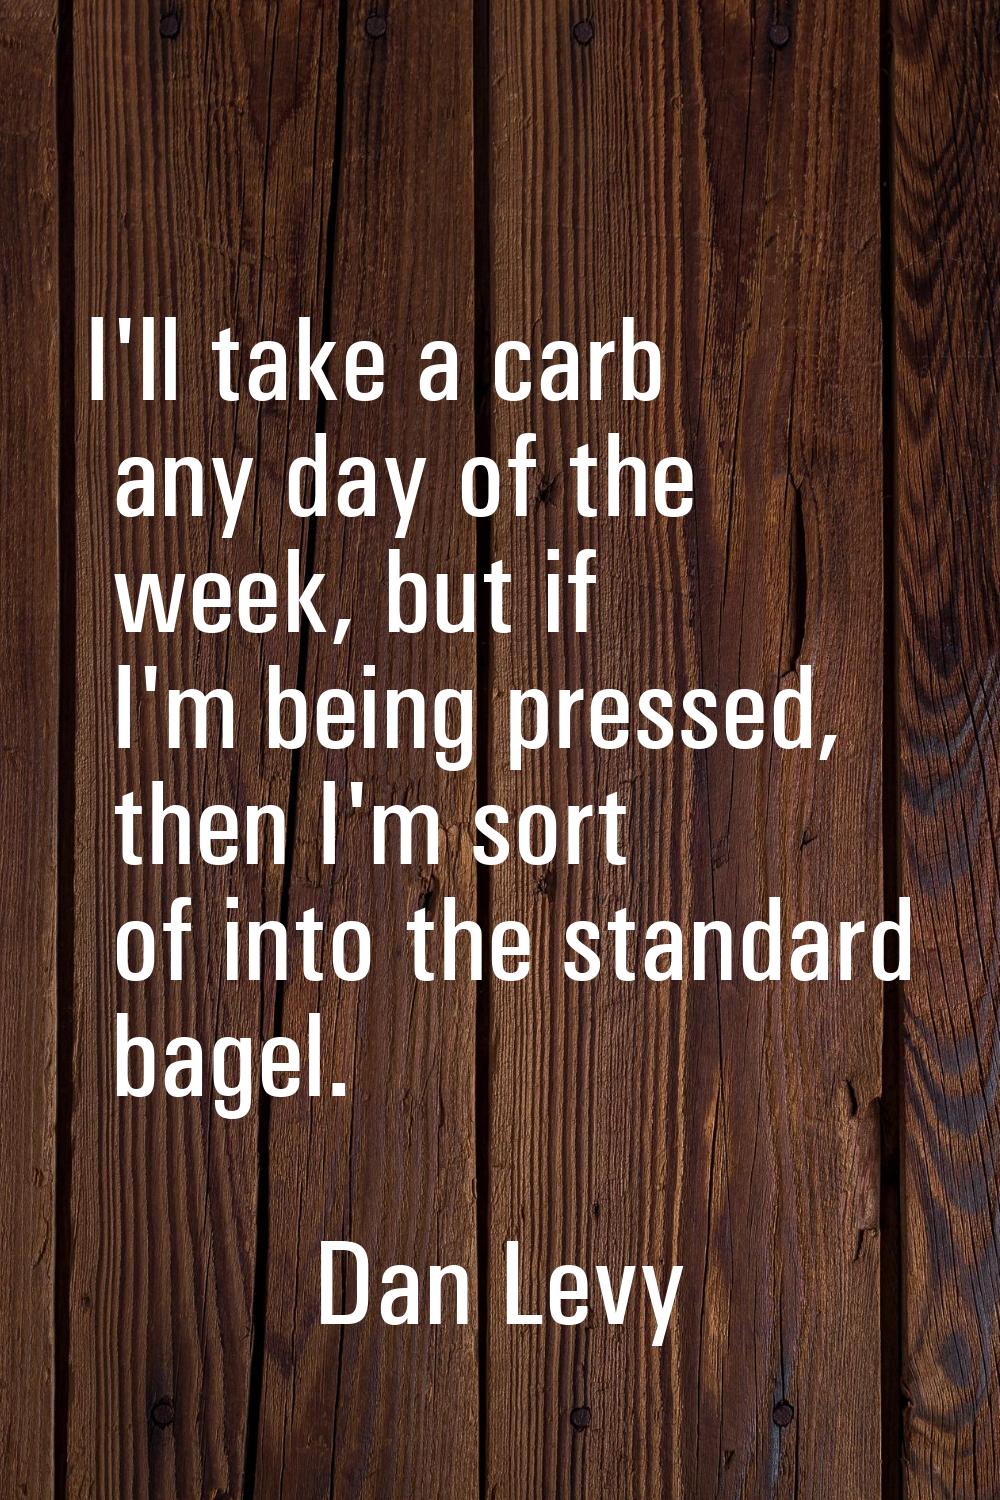 I'll take a carb any day of the week, but if I'm being pressed, then I'm sort of into the standard 